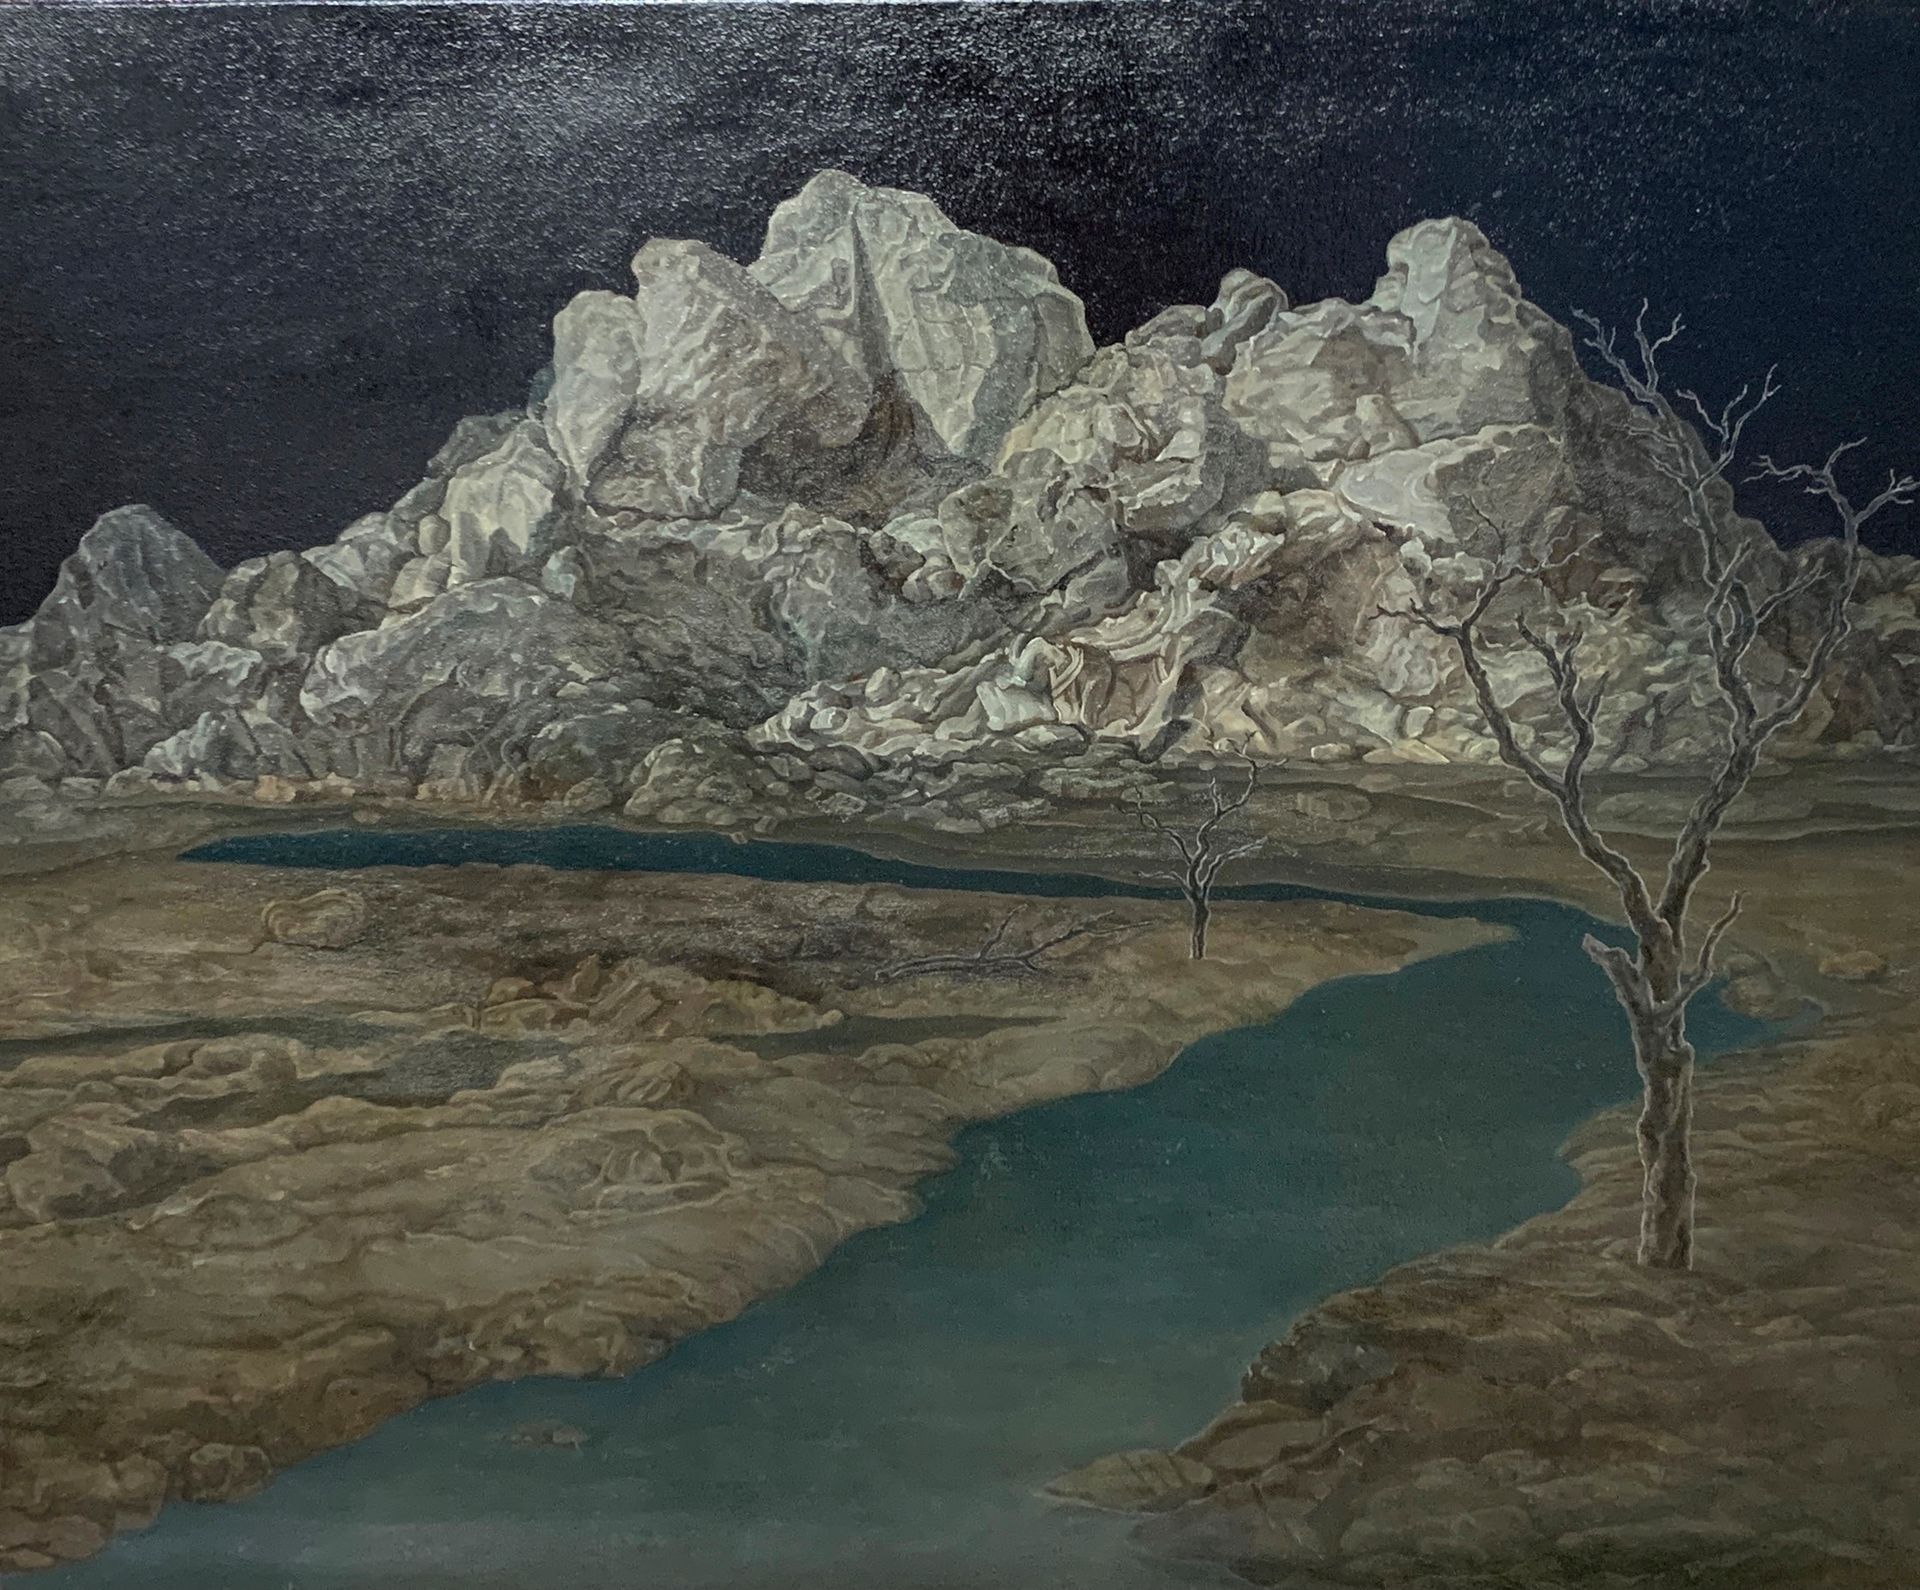 LI DONGLU (1982) Mountain and river, 2016
Oil on canvas
Size: 38 x 46 cm